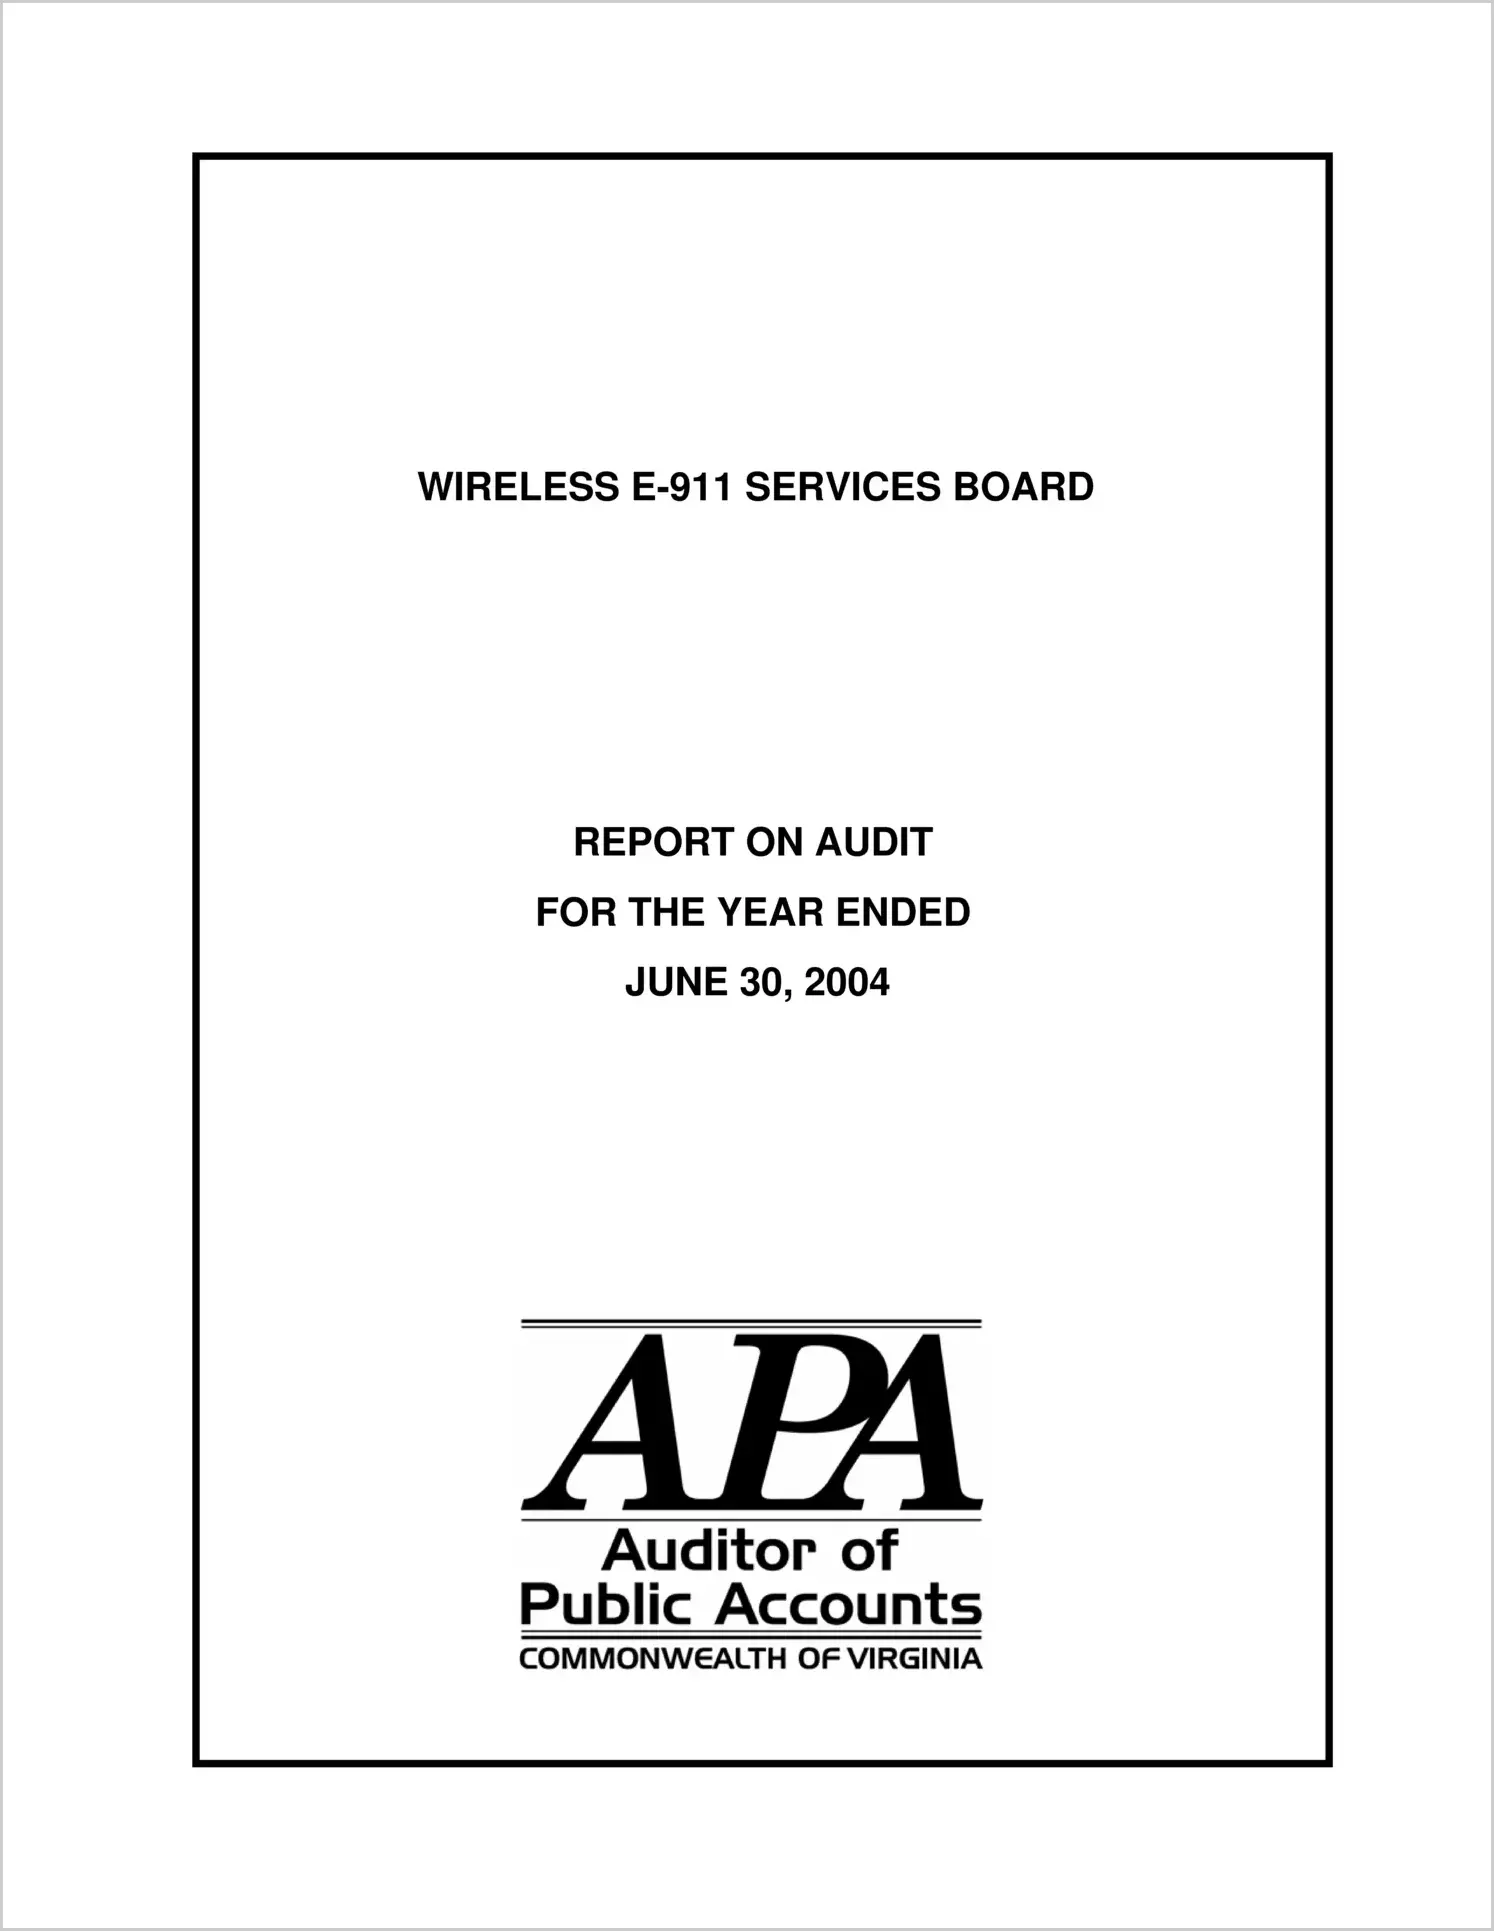 Wireless E-911 Services Board for the year ended June 30, 2004